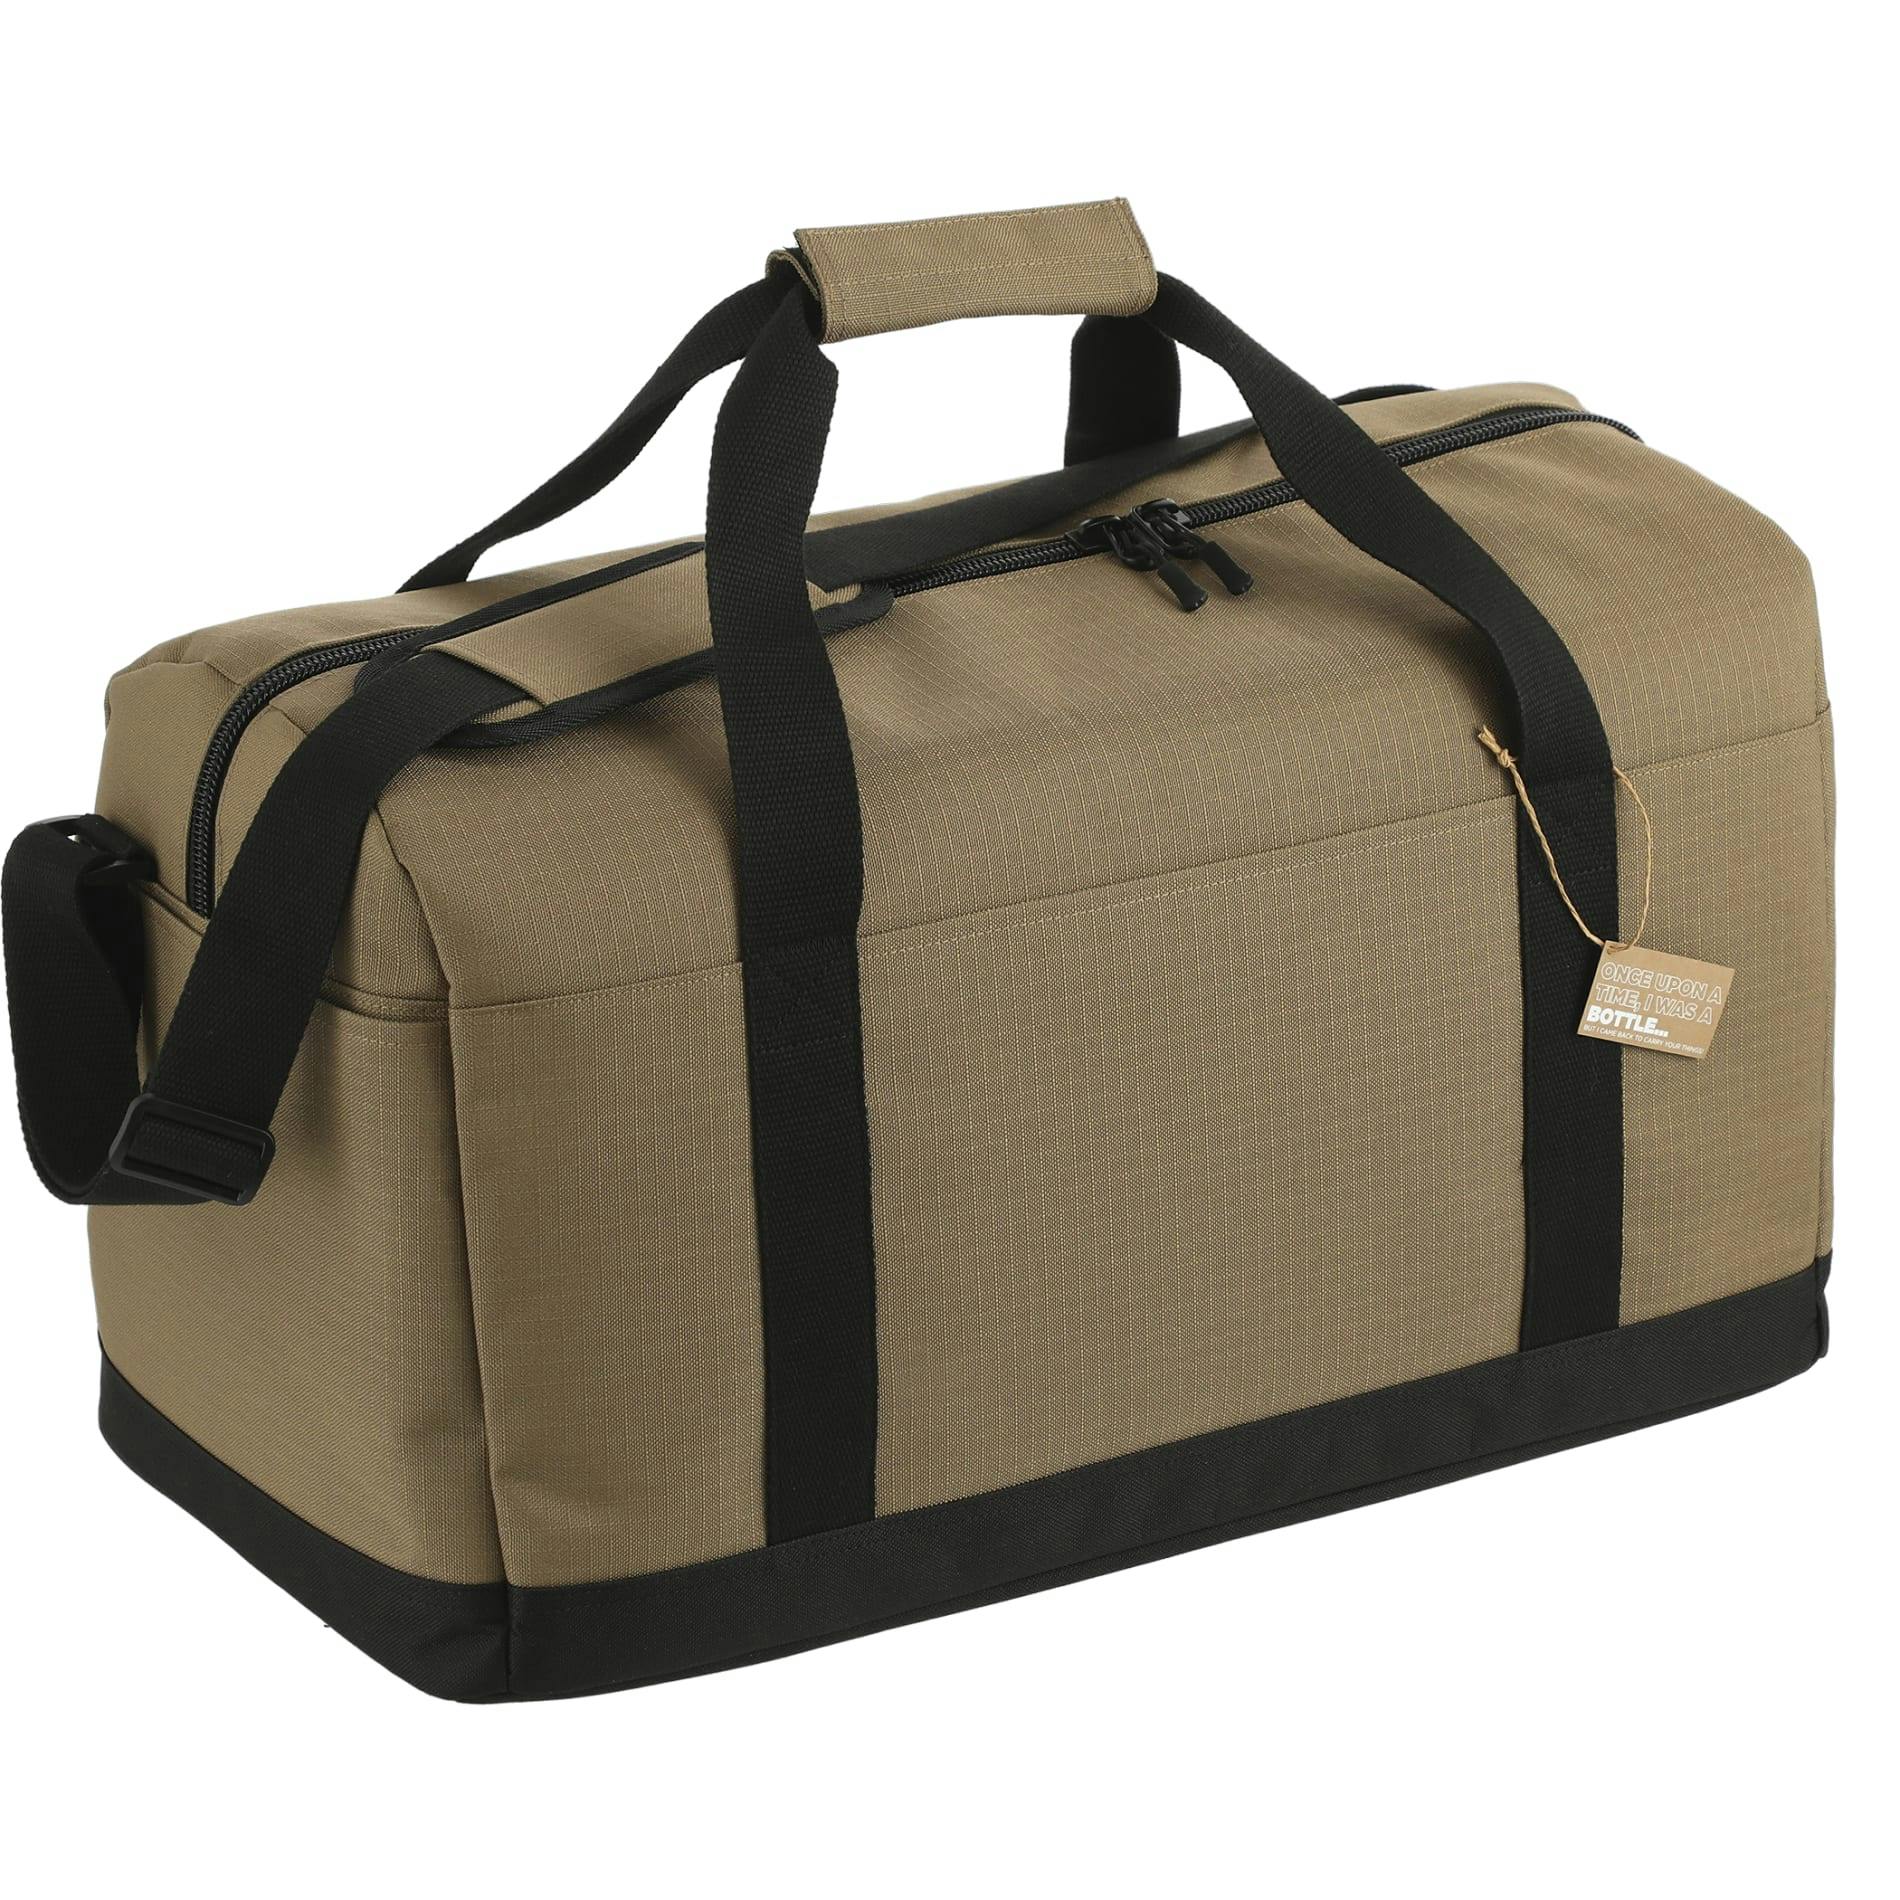 NBN Recycled Utility Duffel - additional Image 3